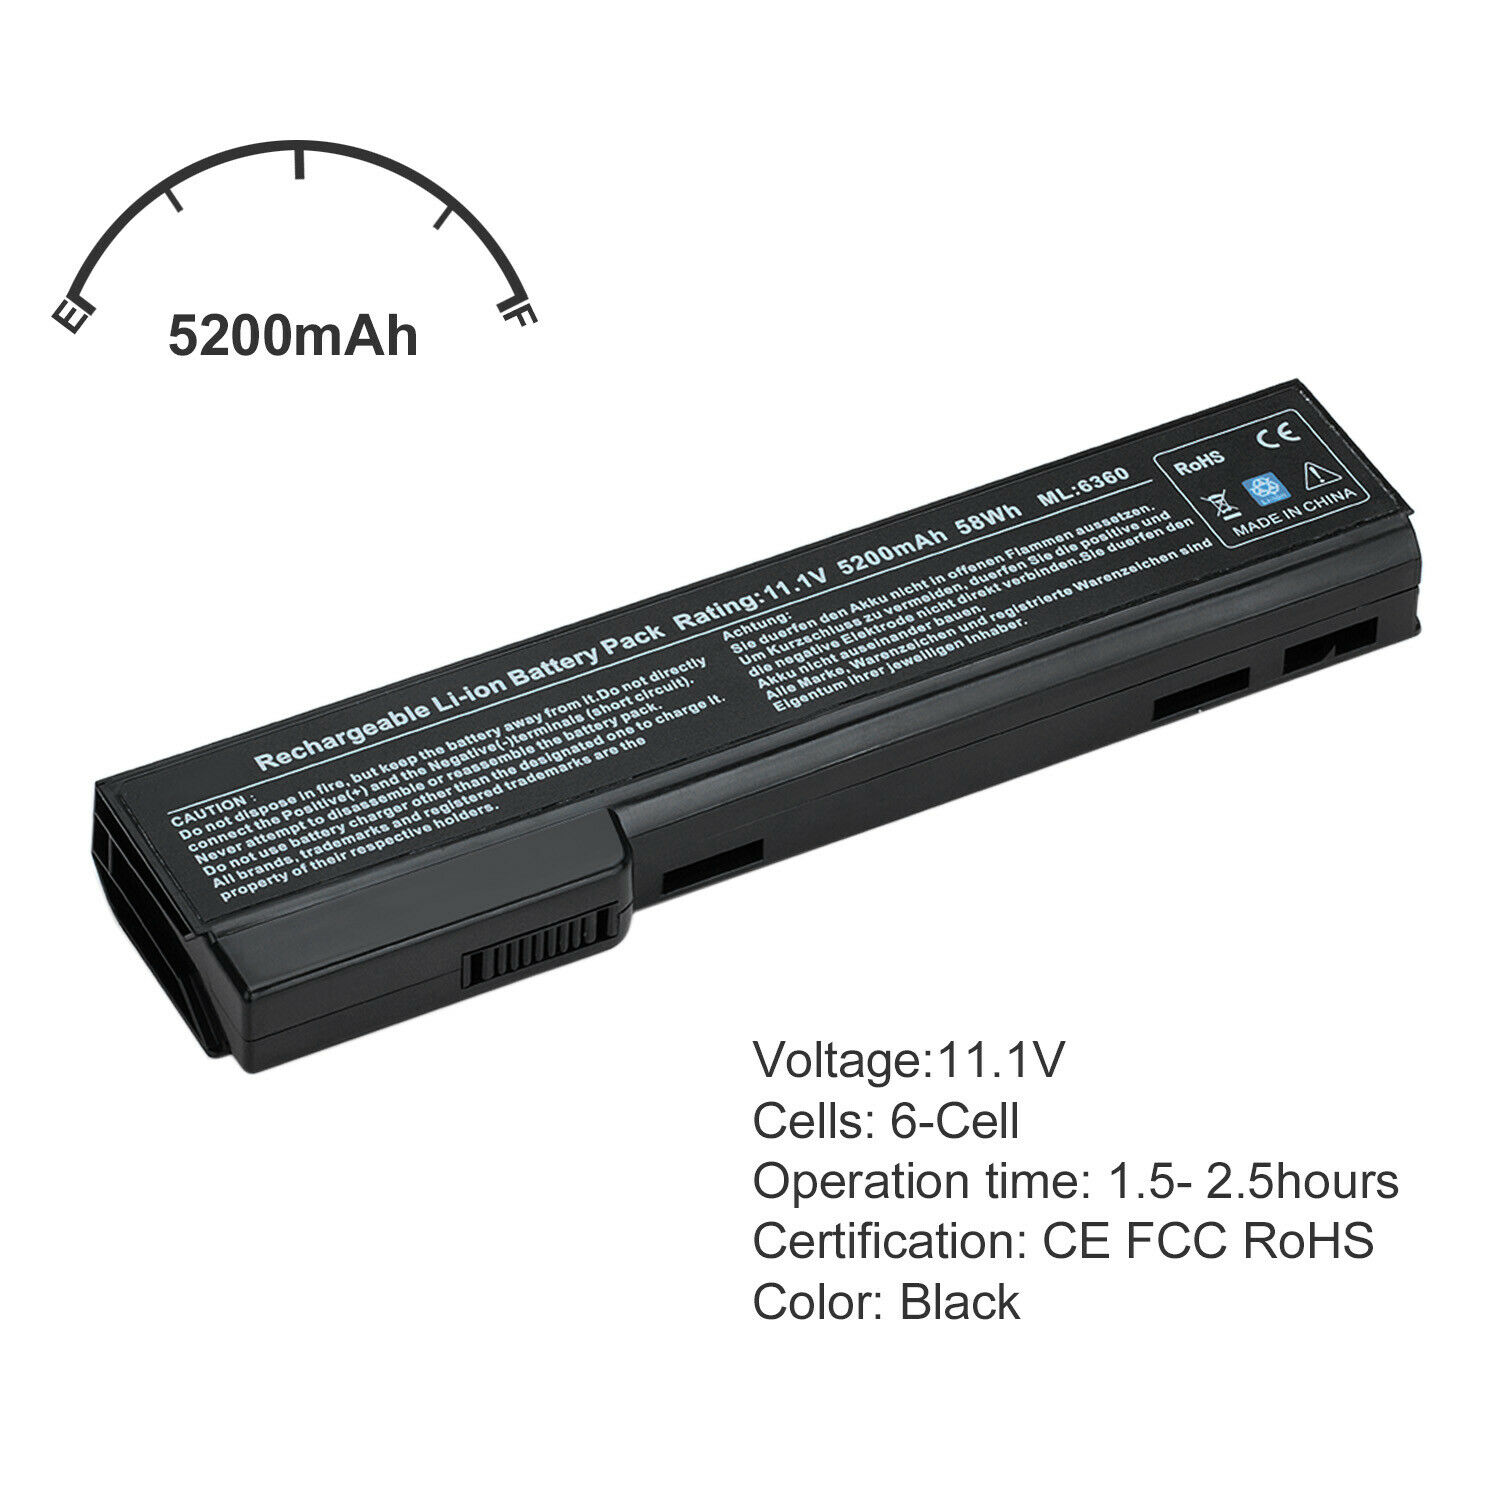 New Battery For HP EliteBook 8560p 8460p 8460w 628368-351 HSTNN-LB2H QK642AA USA - image 4 of 6